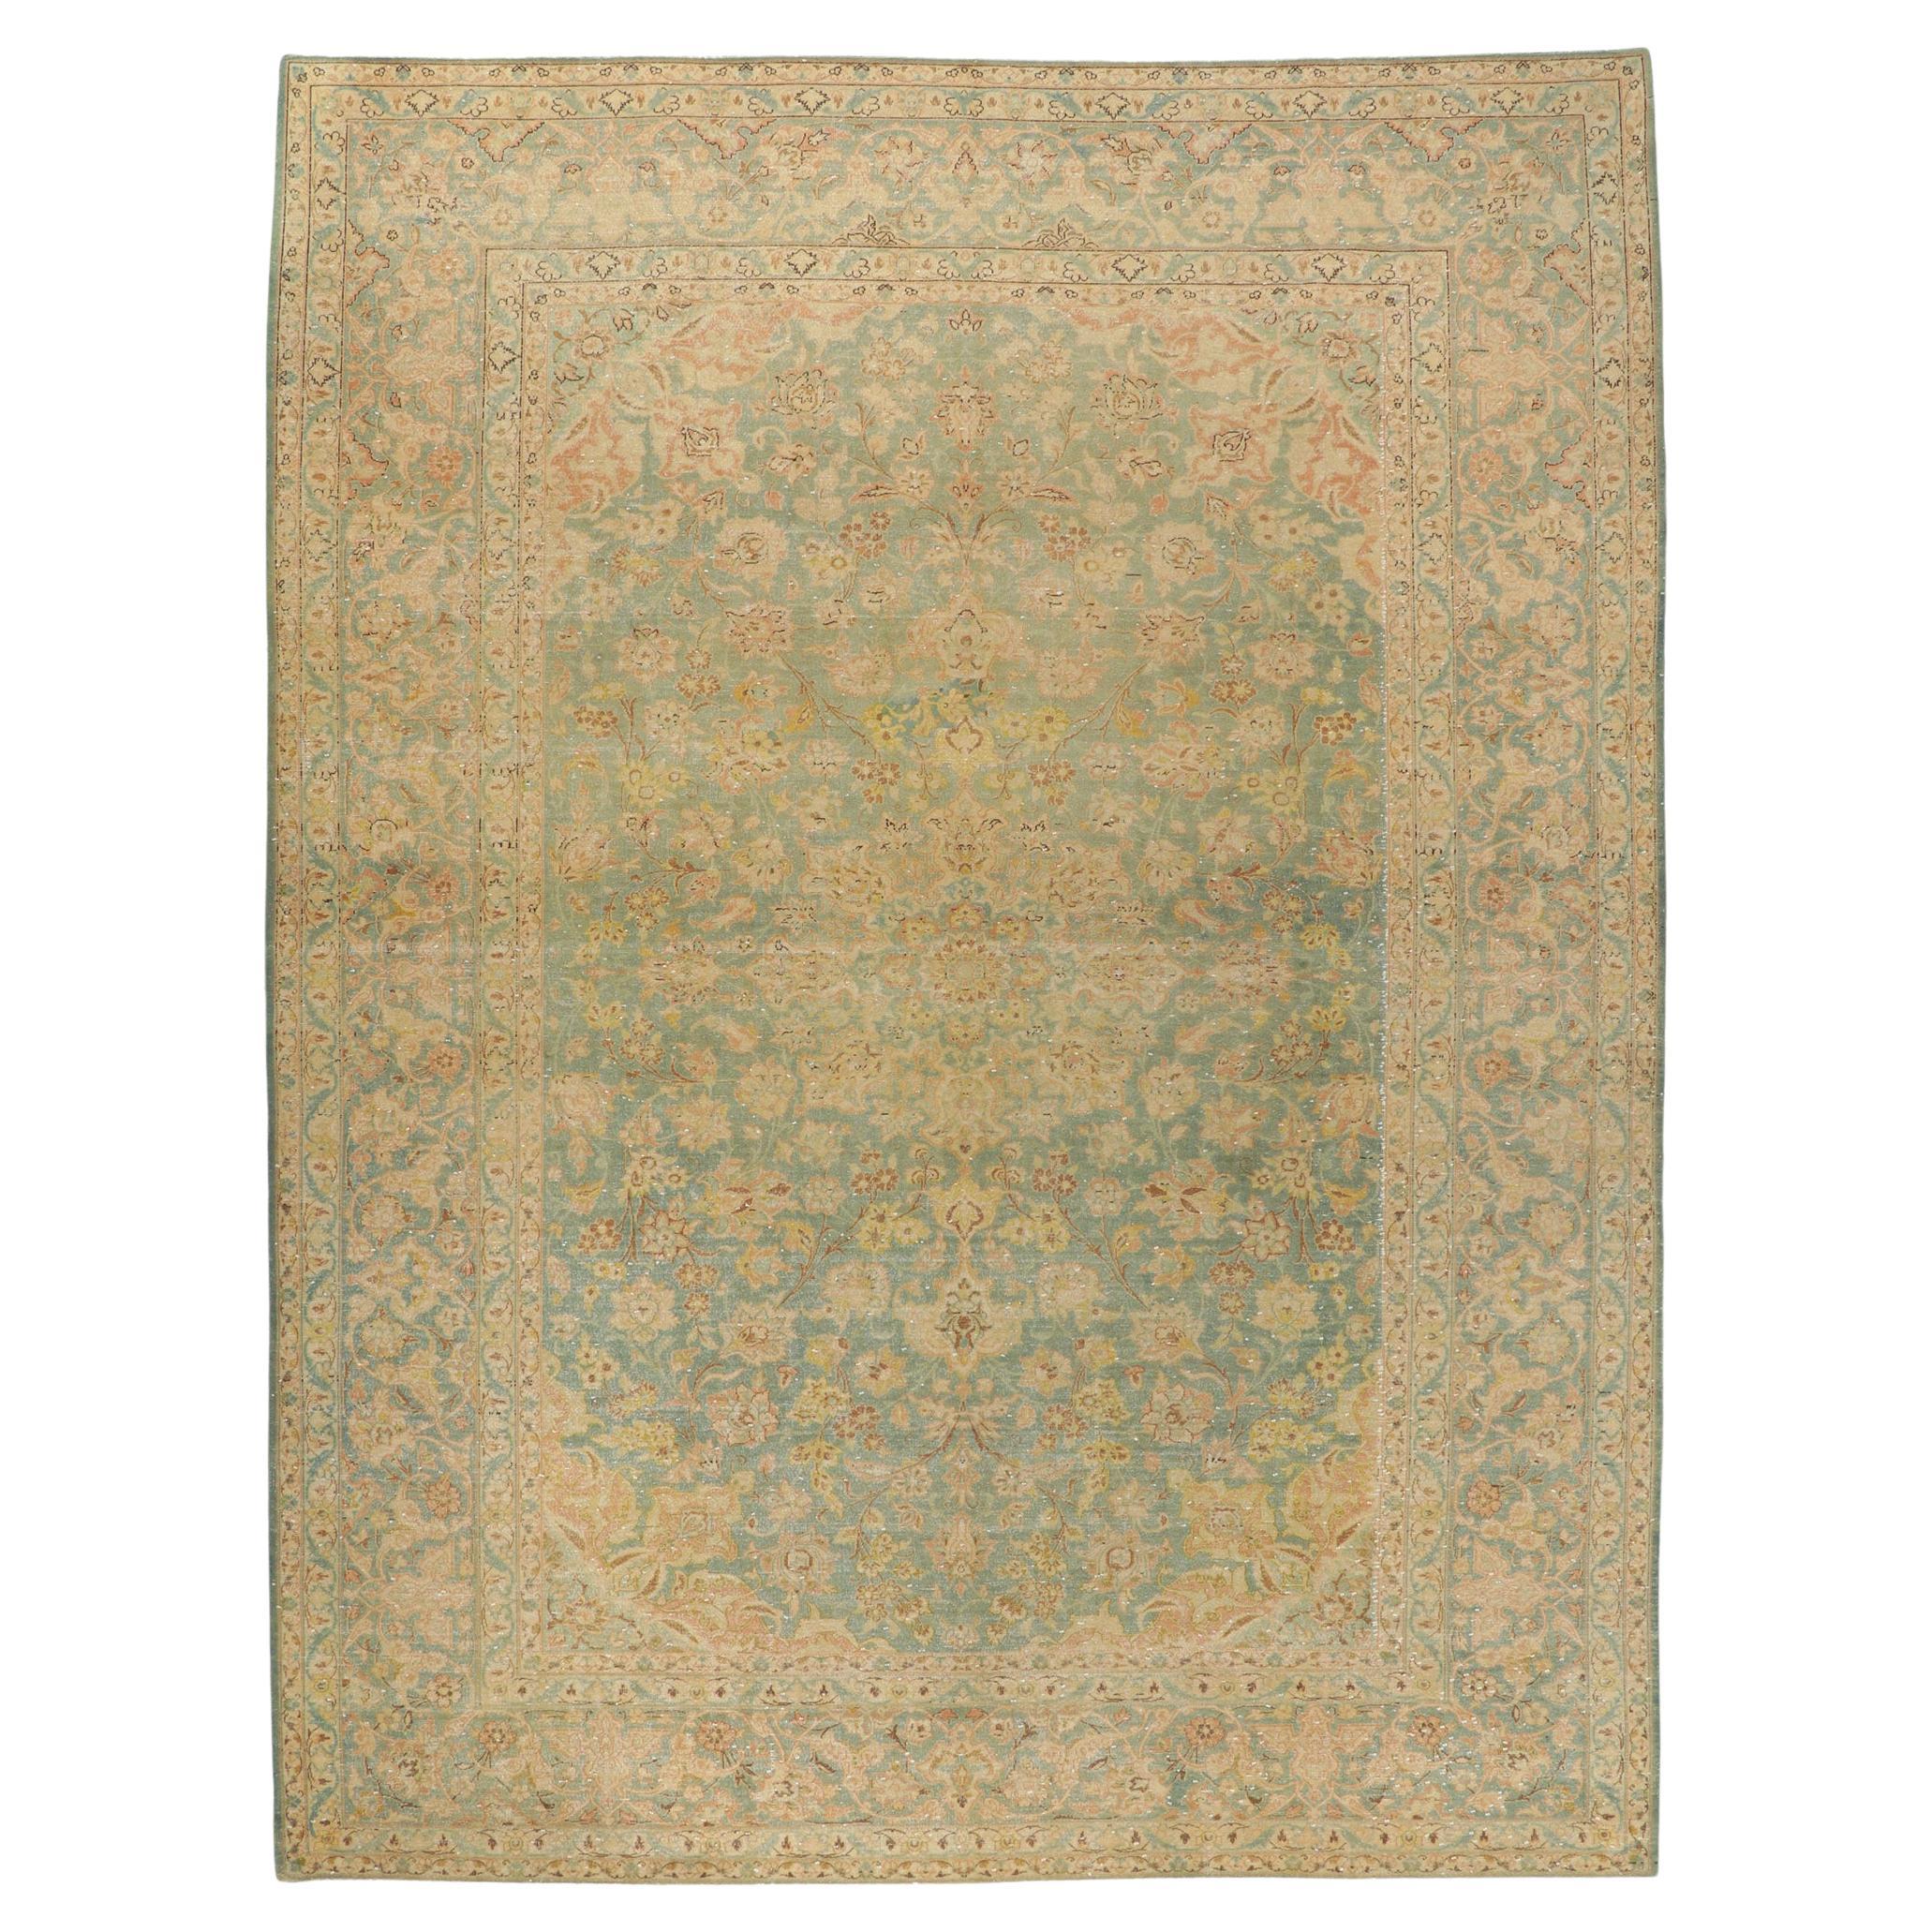 Distressed Vintage Persian Kashan Rug with Faded Soft Earth-Tone Colors For Sale